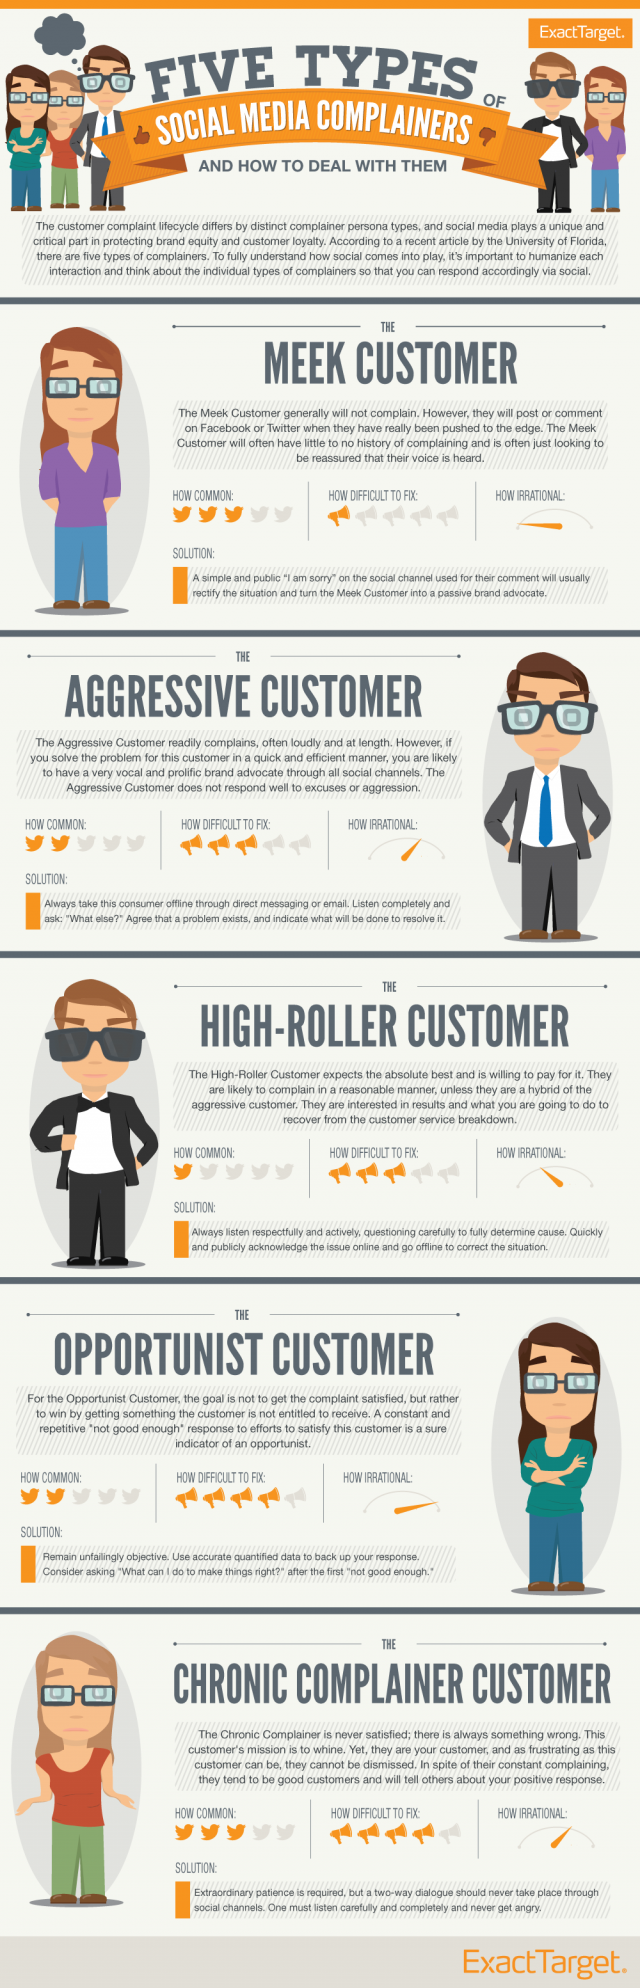 How to Deal With Social Media Complainers [INFOGRAPHIC] - An Infographic from Pardot